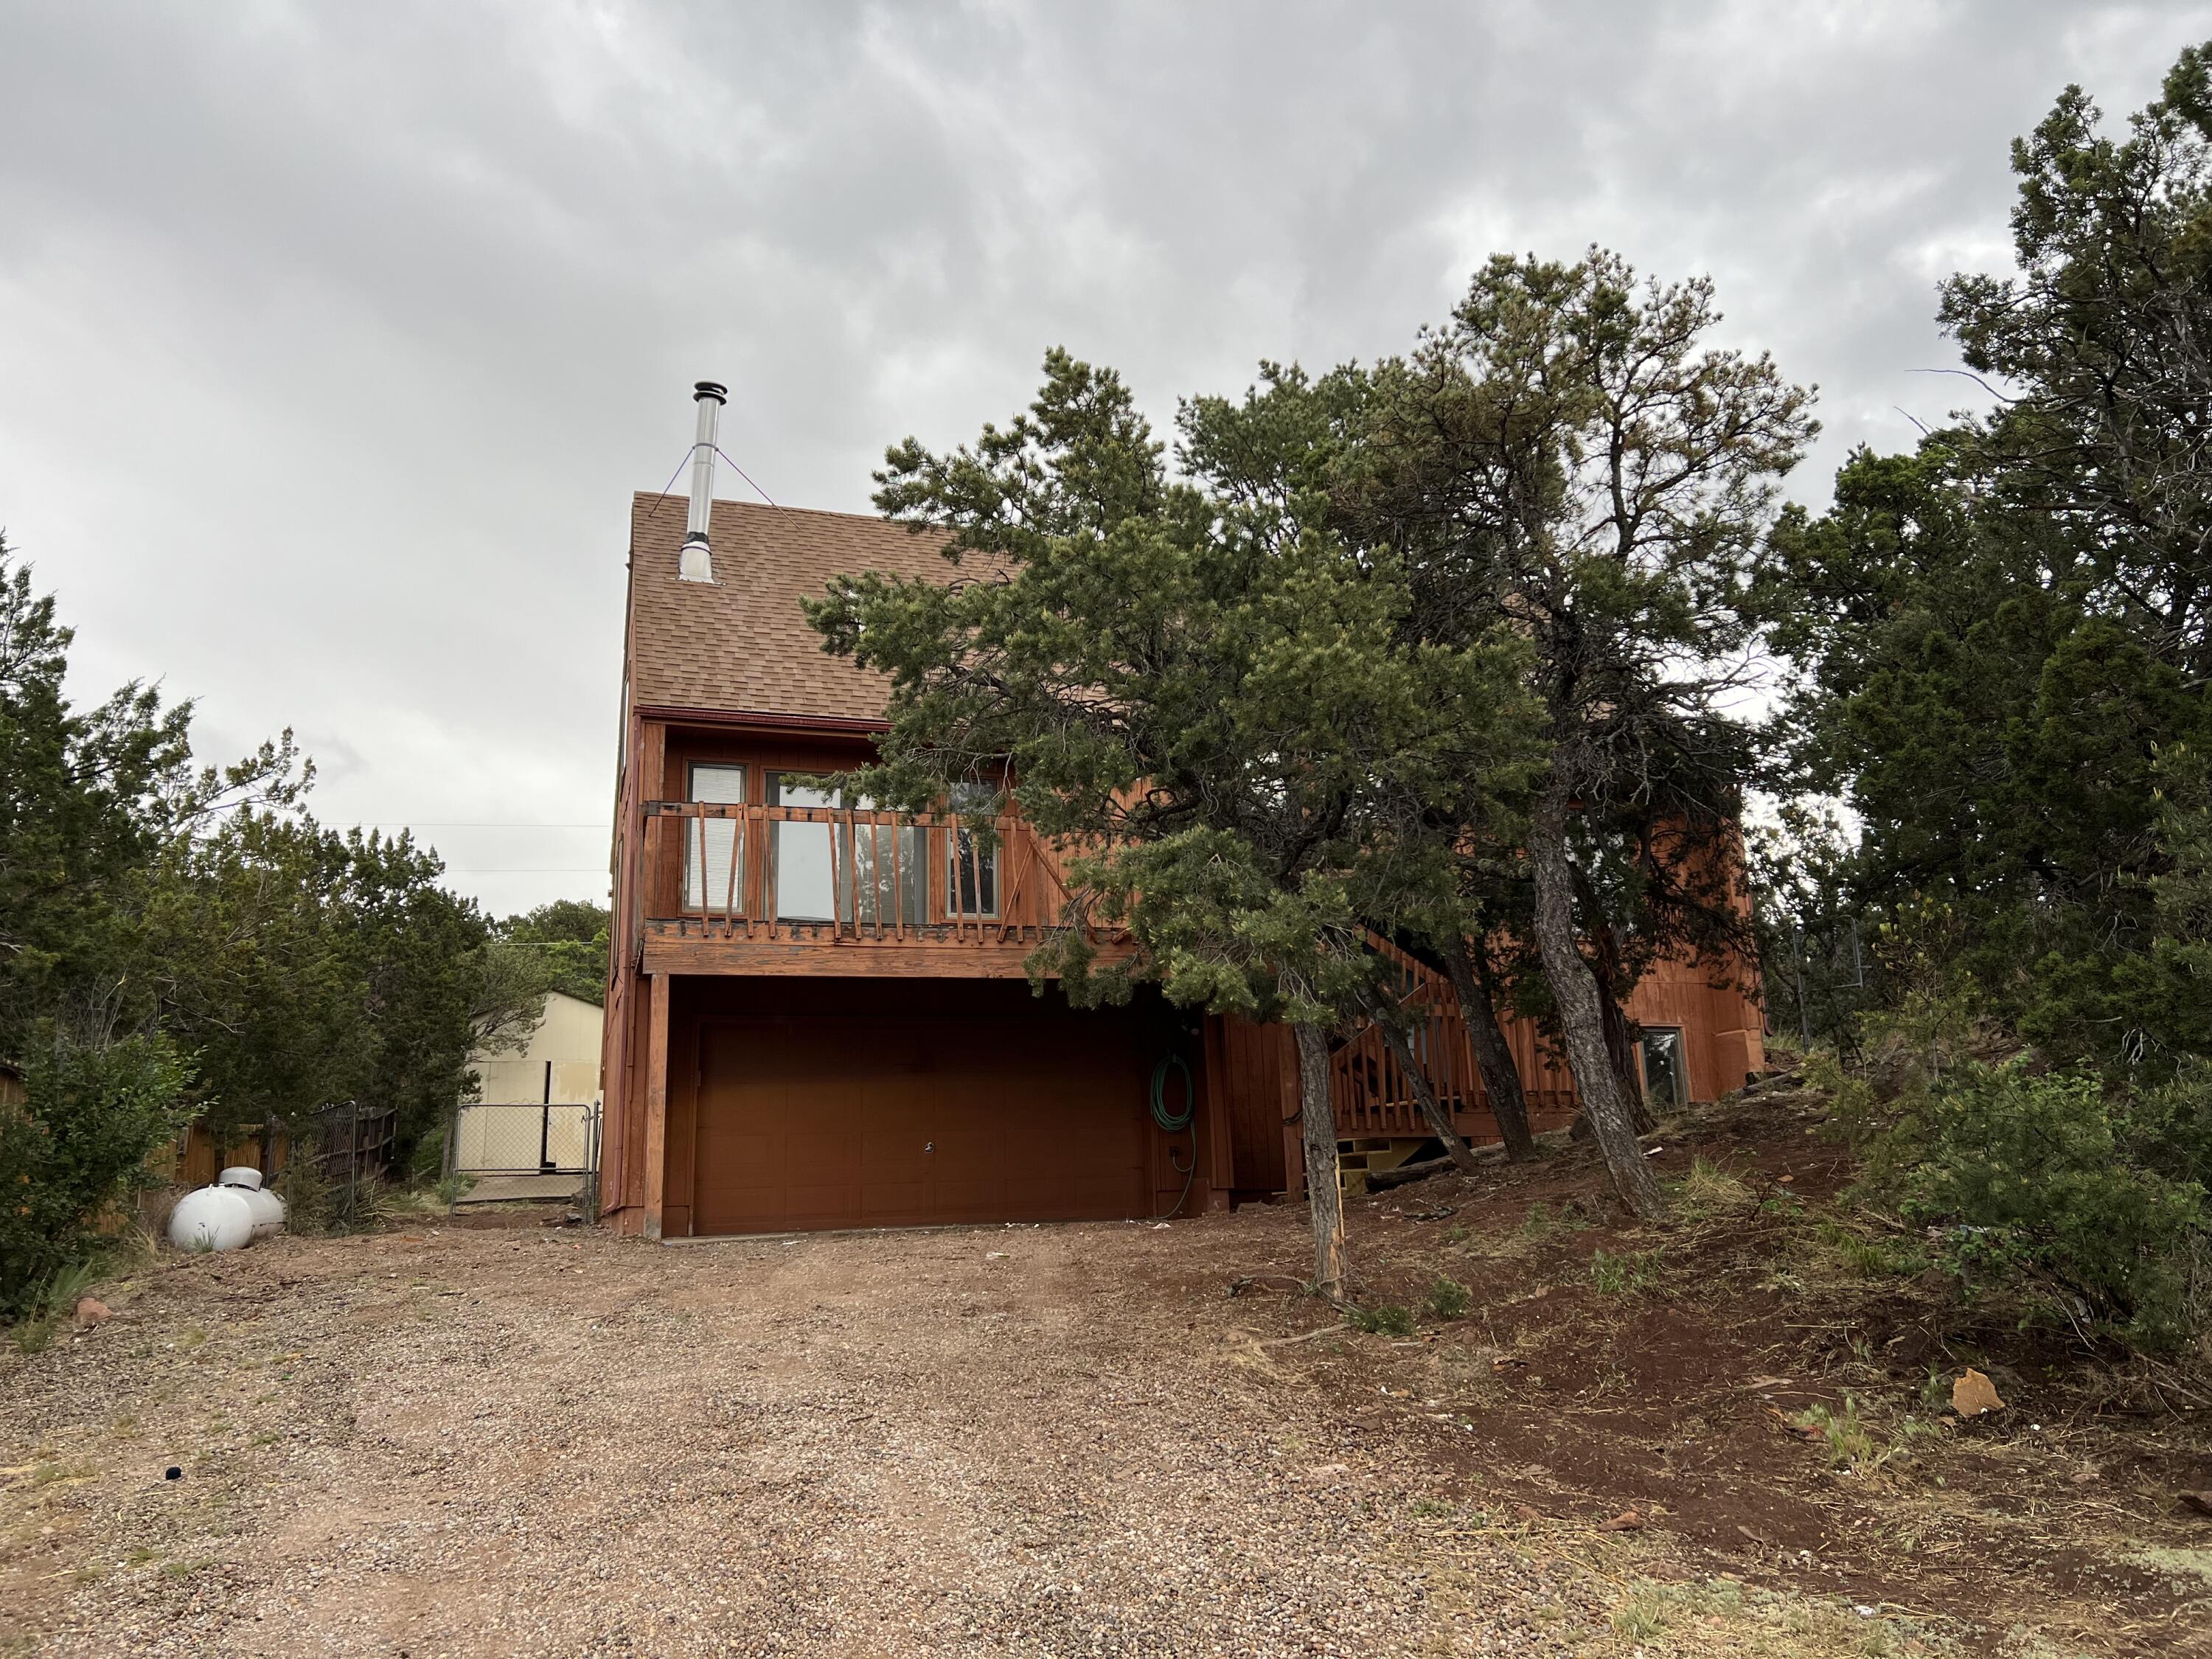 A great opportunity for the saavy investor.  This home has some Amazing Views of the Sandia Mountains.  3 bedrooms, a loft and a 24x12 Bonus Room.  2 Decks (please don't walk out on decks). Mature trees and a space on Earth that will take your breath away.  Storage shed on just under a 1/2 acre.